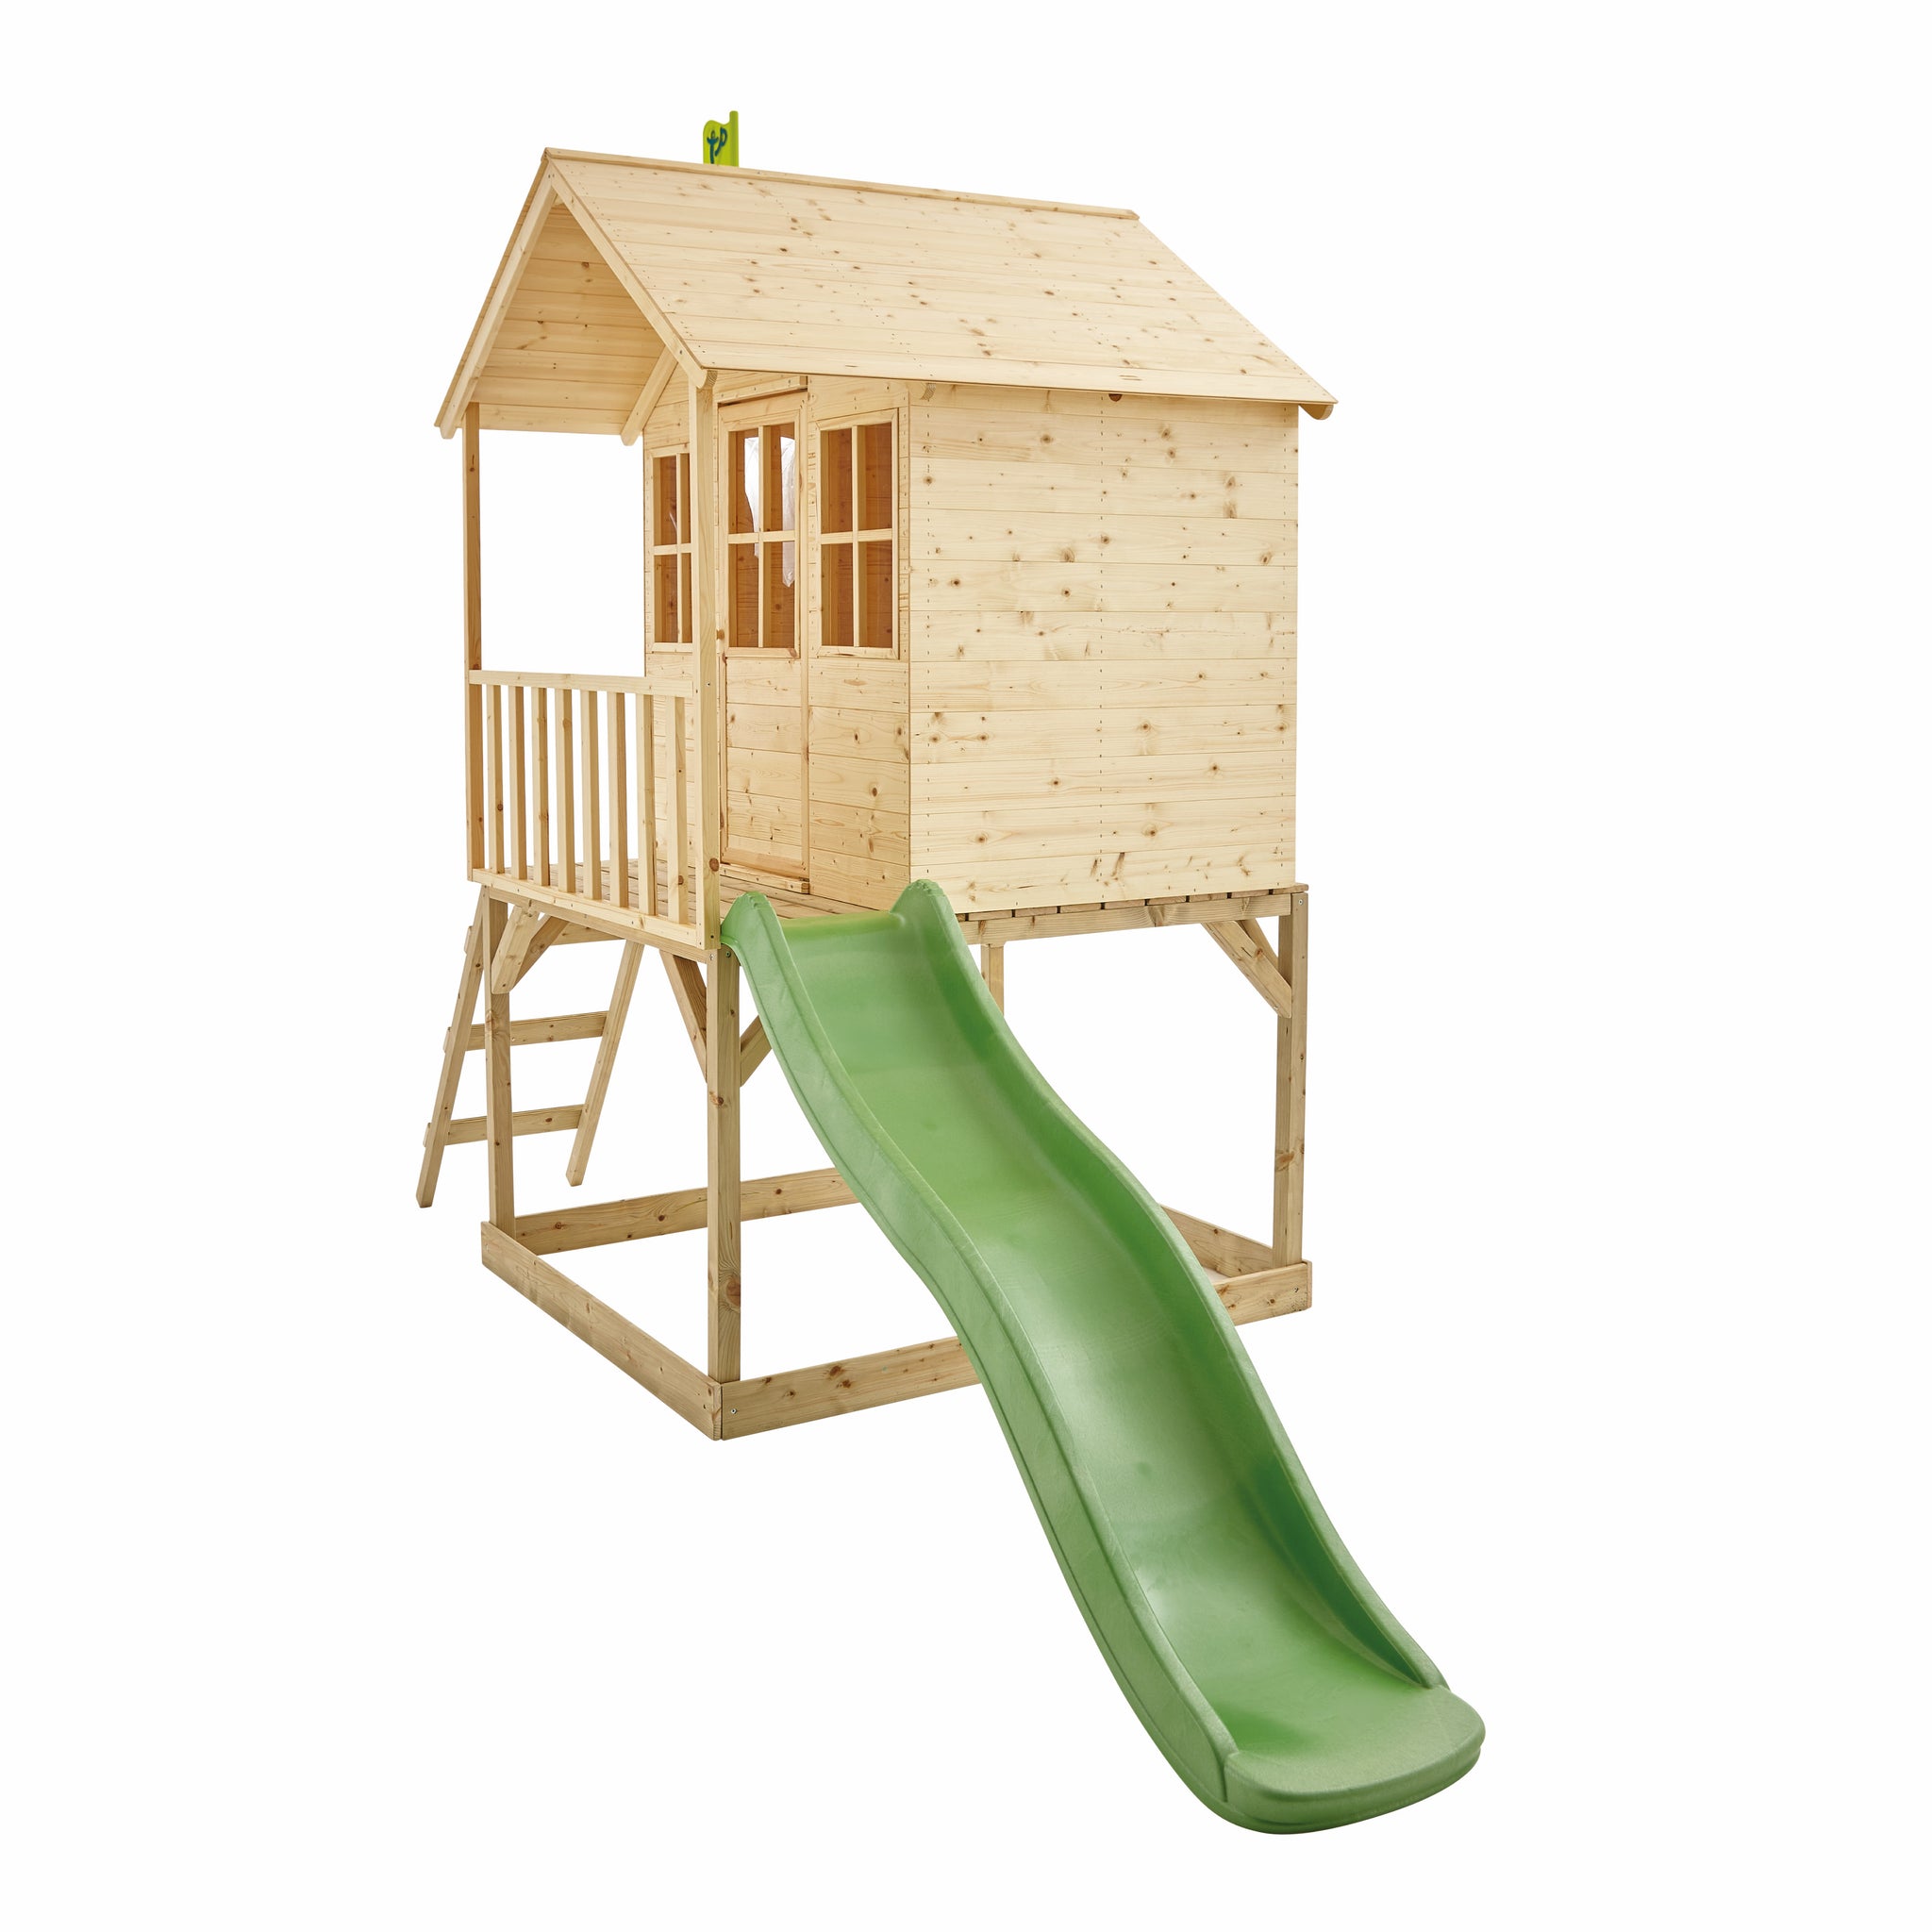 wooden playhouse tower